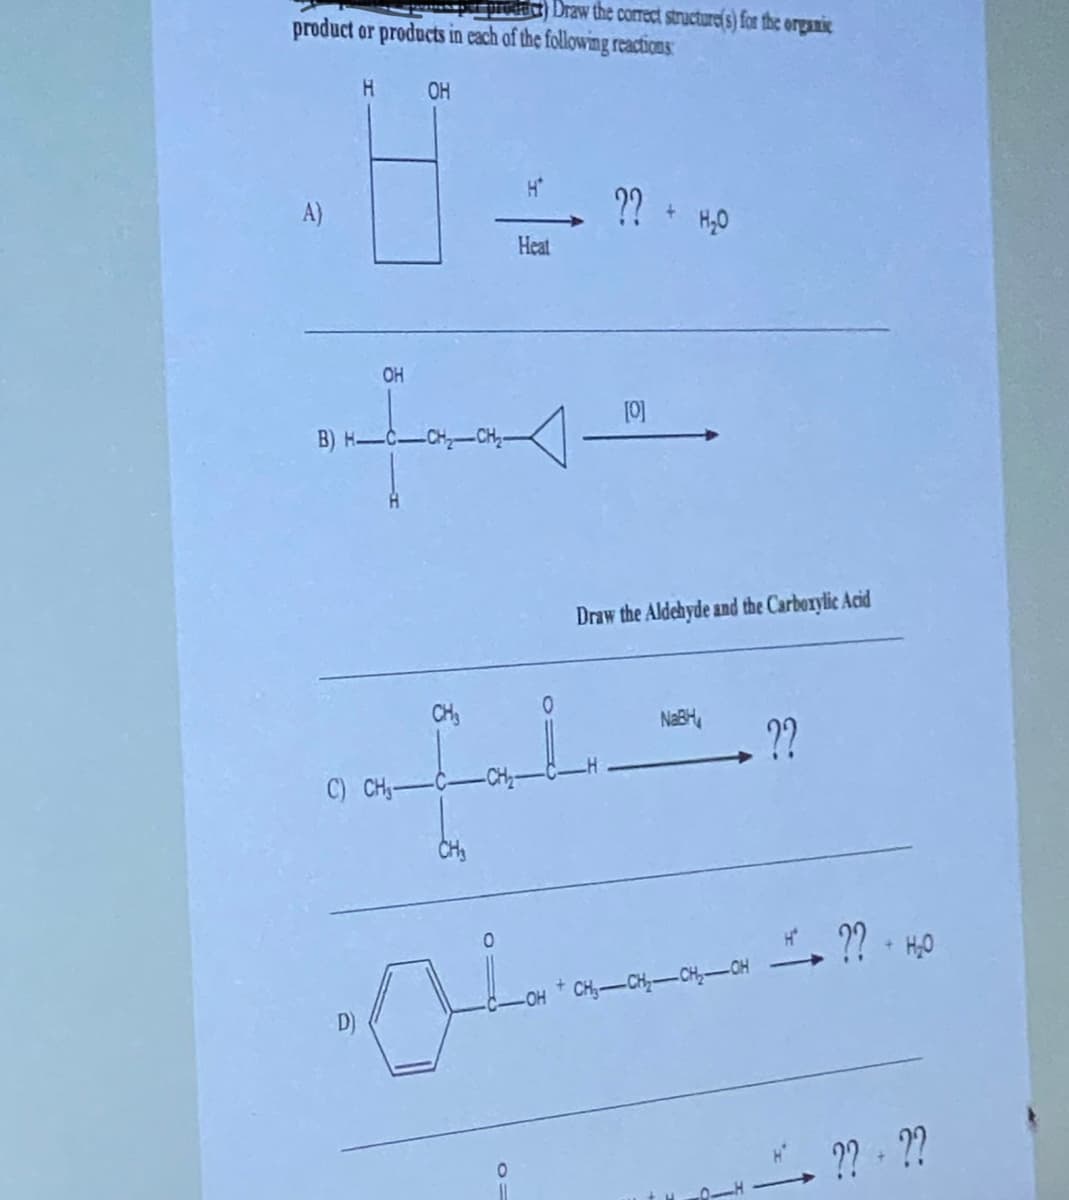 Draw the correct structure(s) for the organic
product or products in each of the following reactions
H OH
A)
OH
B) H-C-CH₂-CH₂-
D)
TA
0
H*
O=
Heat
CH₂
cufat.
C) CH₂-C-
CH₂
?? + H₂O
[0]
Draw the Aldehyde and the Carboxylic Acid
NaBH
CH₂-CH₂-CH₂-OH
??
?? - H₂0
?? ??